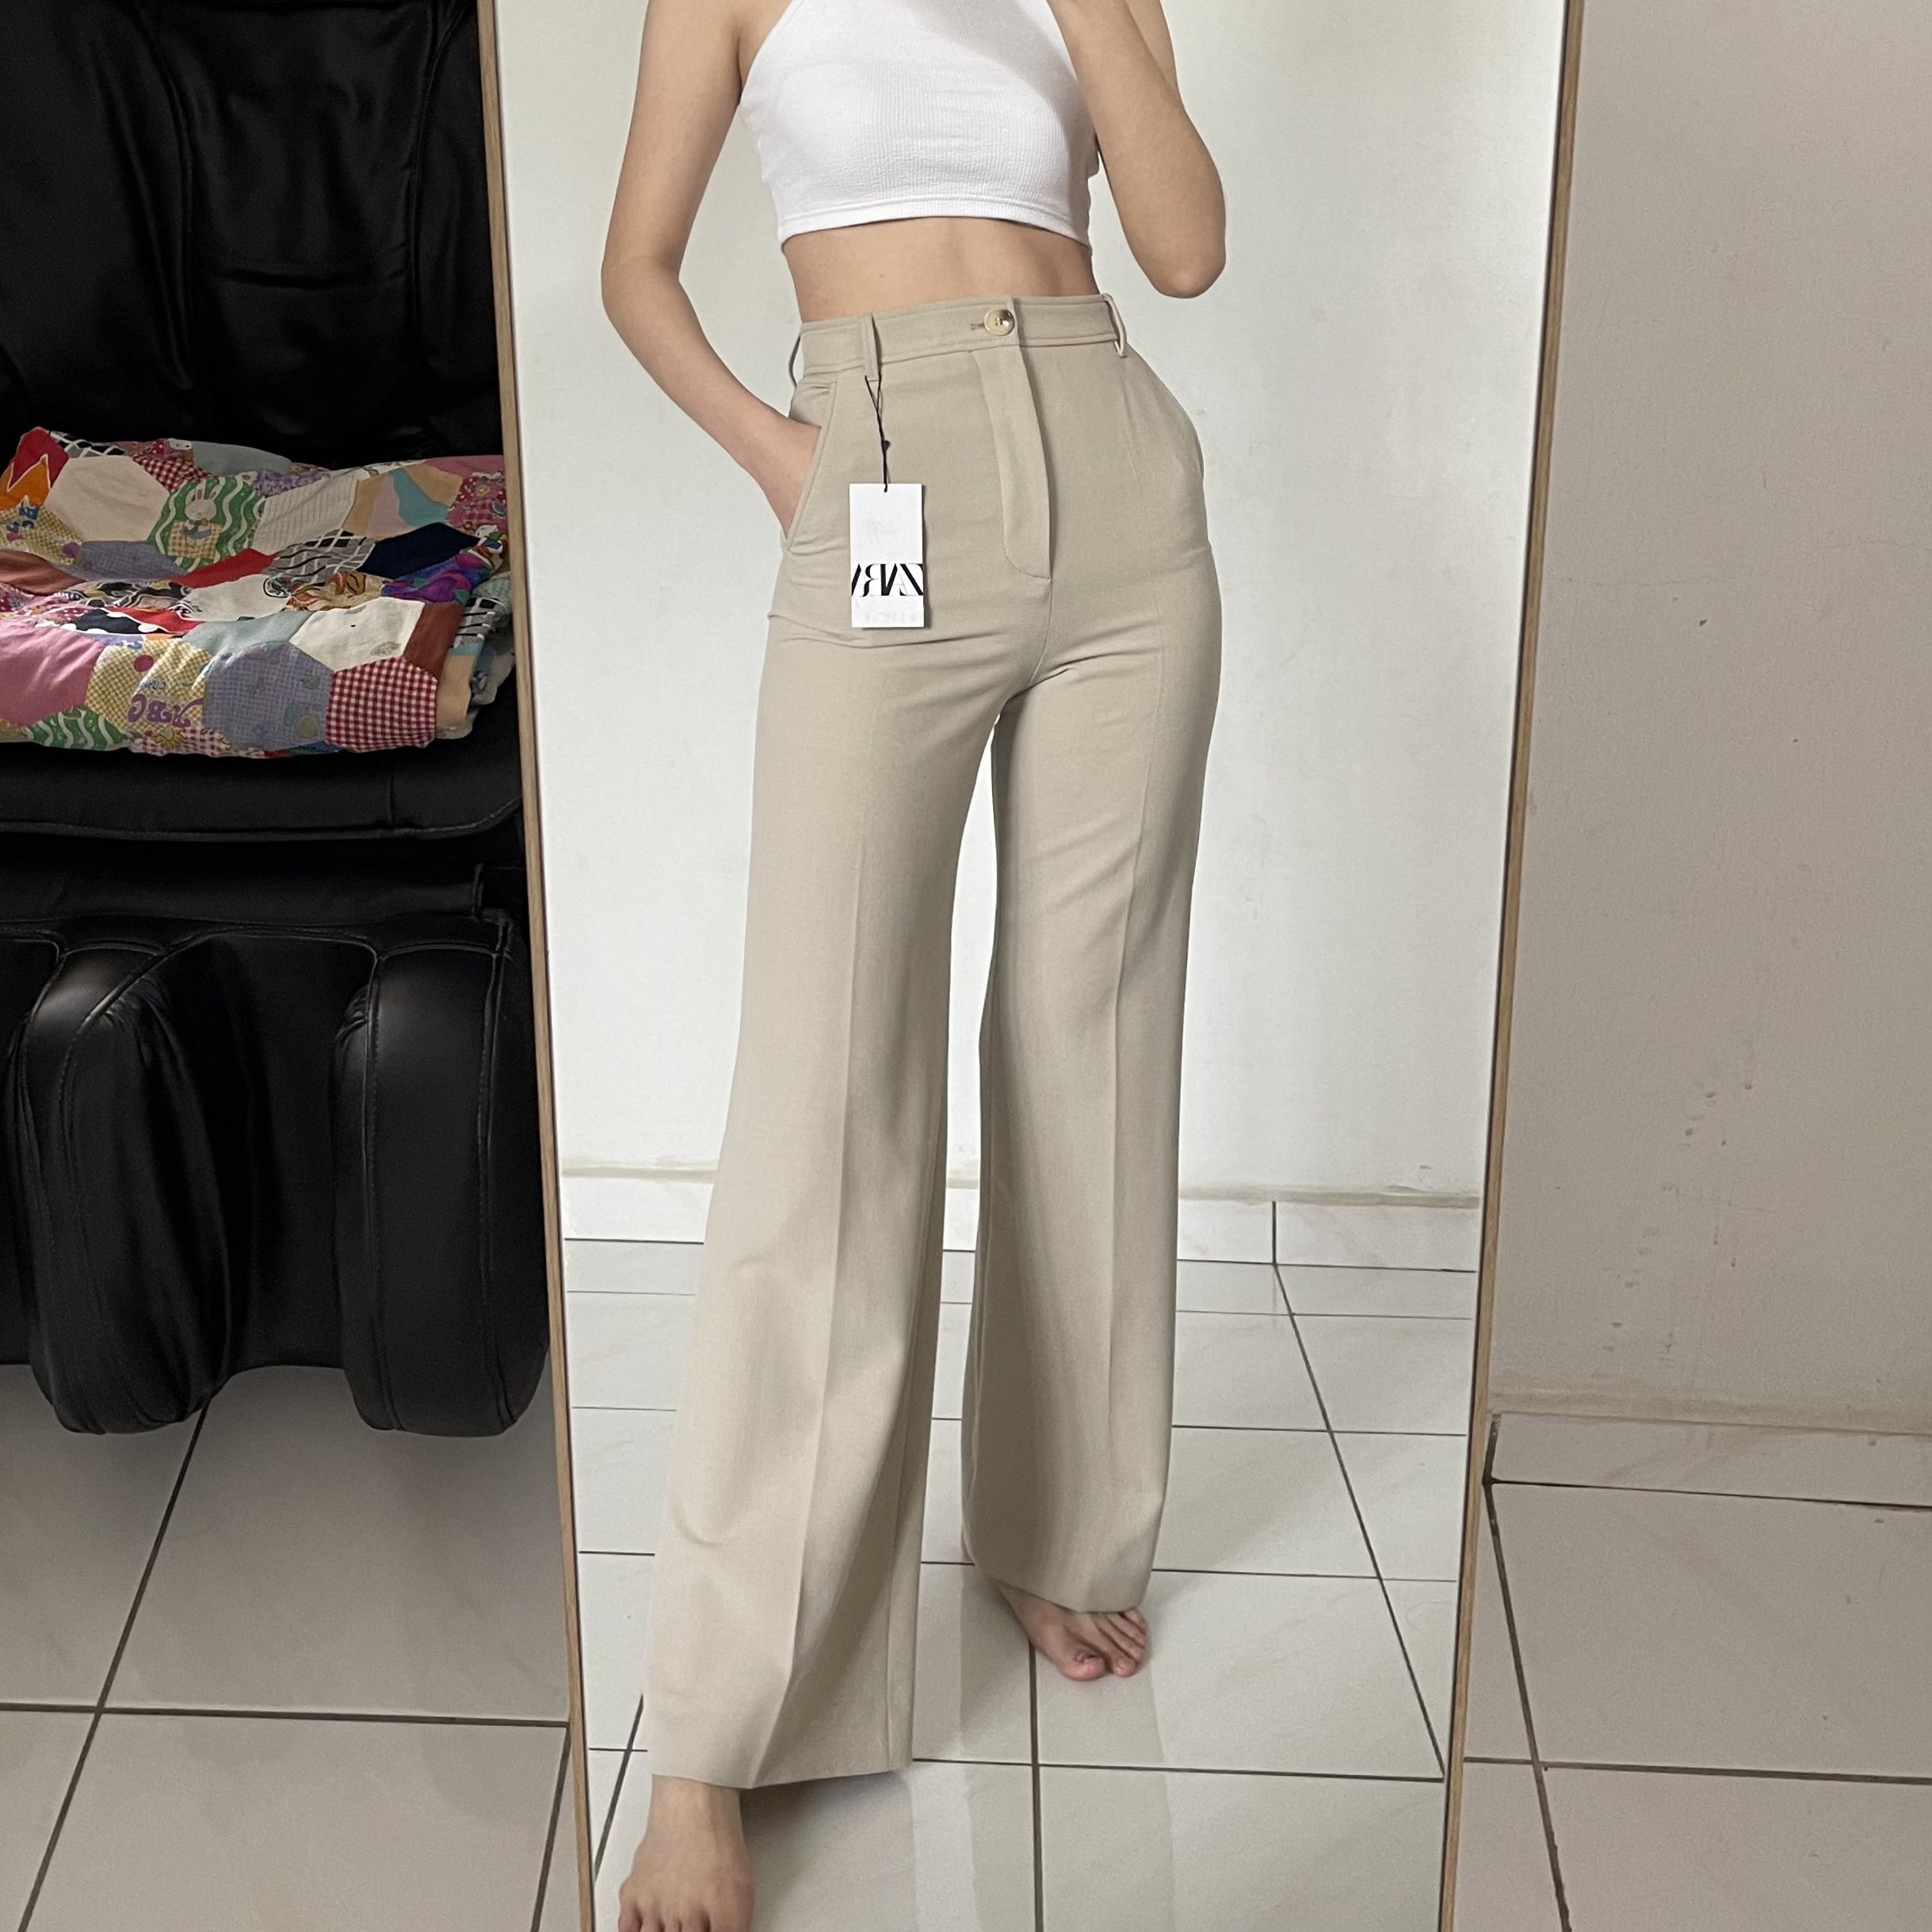 ZARA WOMAN New With Tag HIGHWAISTED PANTS TROUSERS LIGHT BLUE NEW Size Xs   eBay